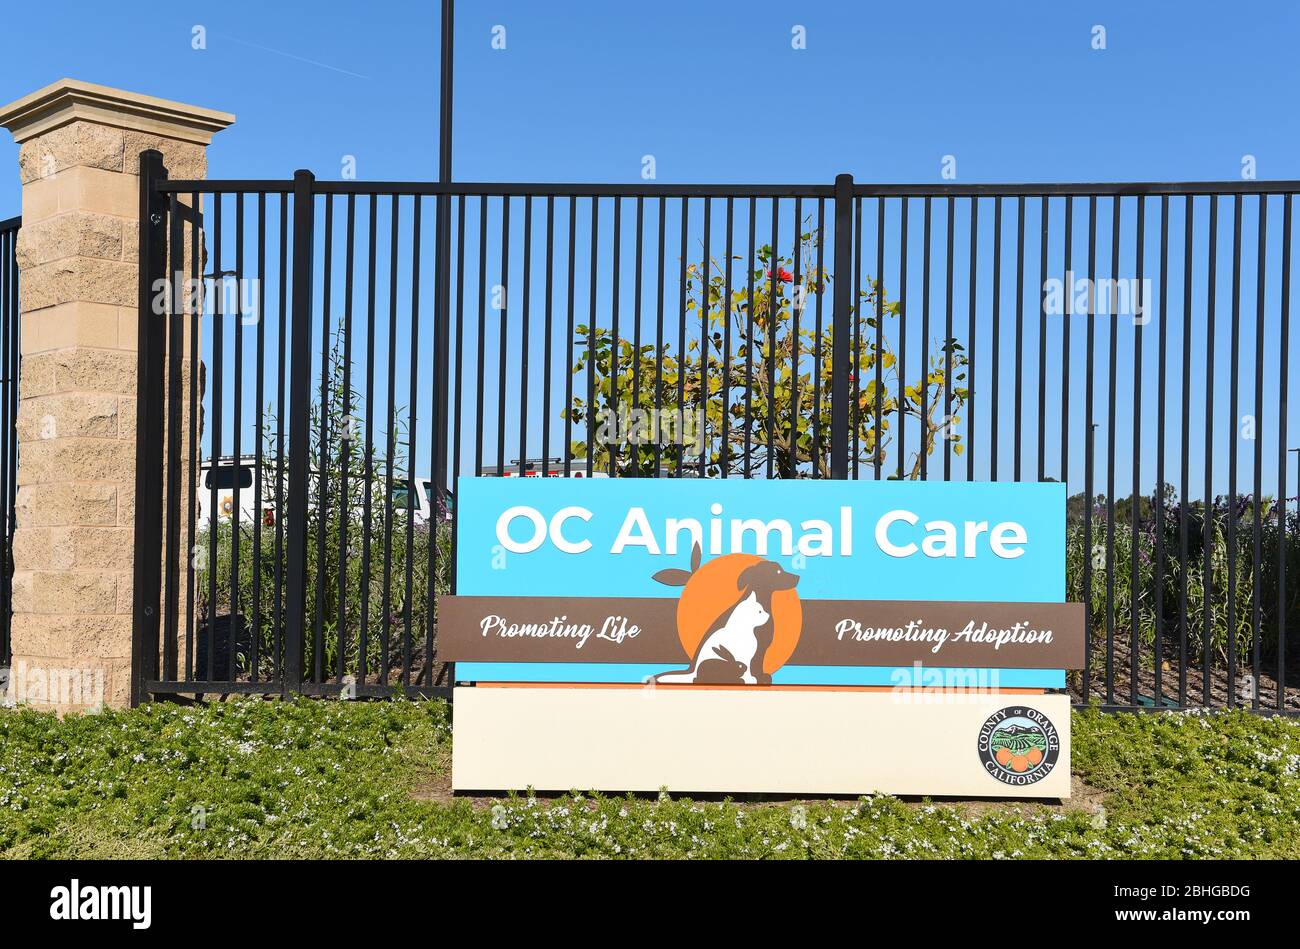 TUSTIN, CALIFORNIA - 25 APRIL 2020: Sign for the OC Animal Care facility, an animal shelter providing adoption and veterinary services. Stock Photo